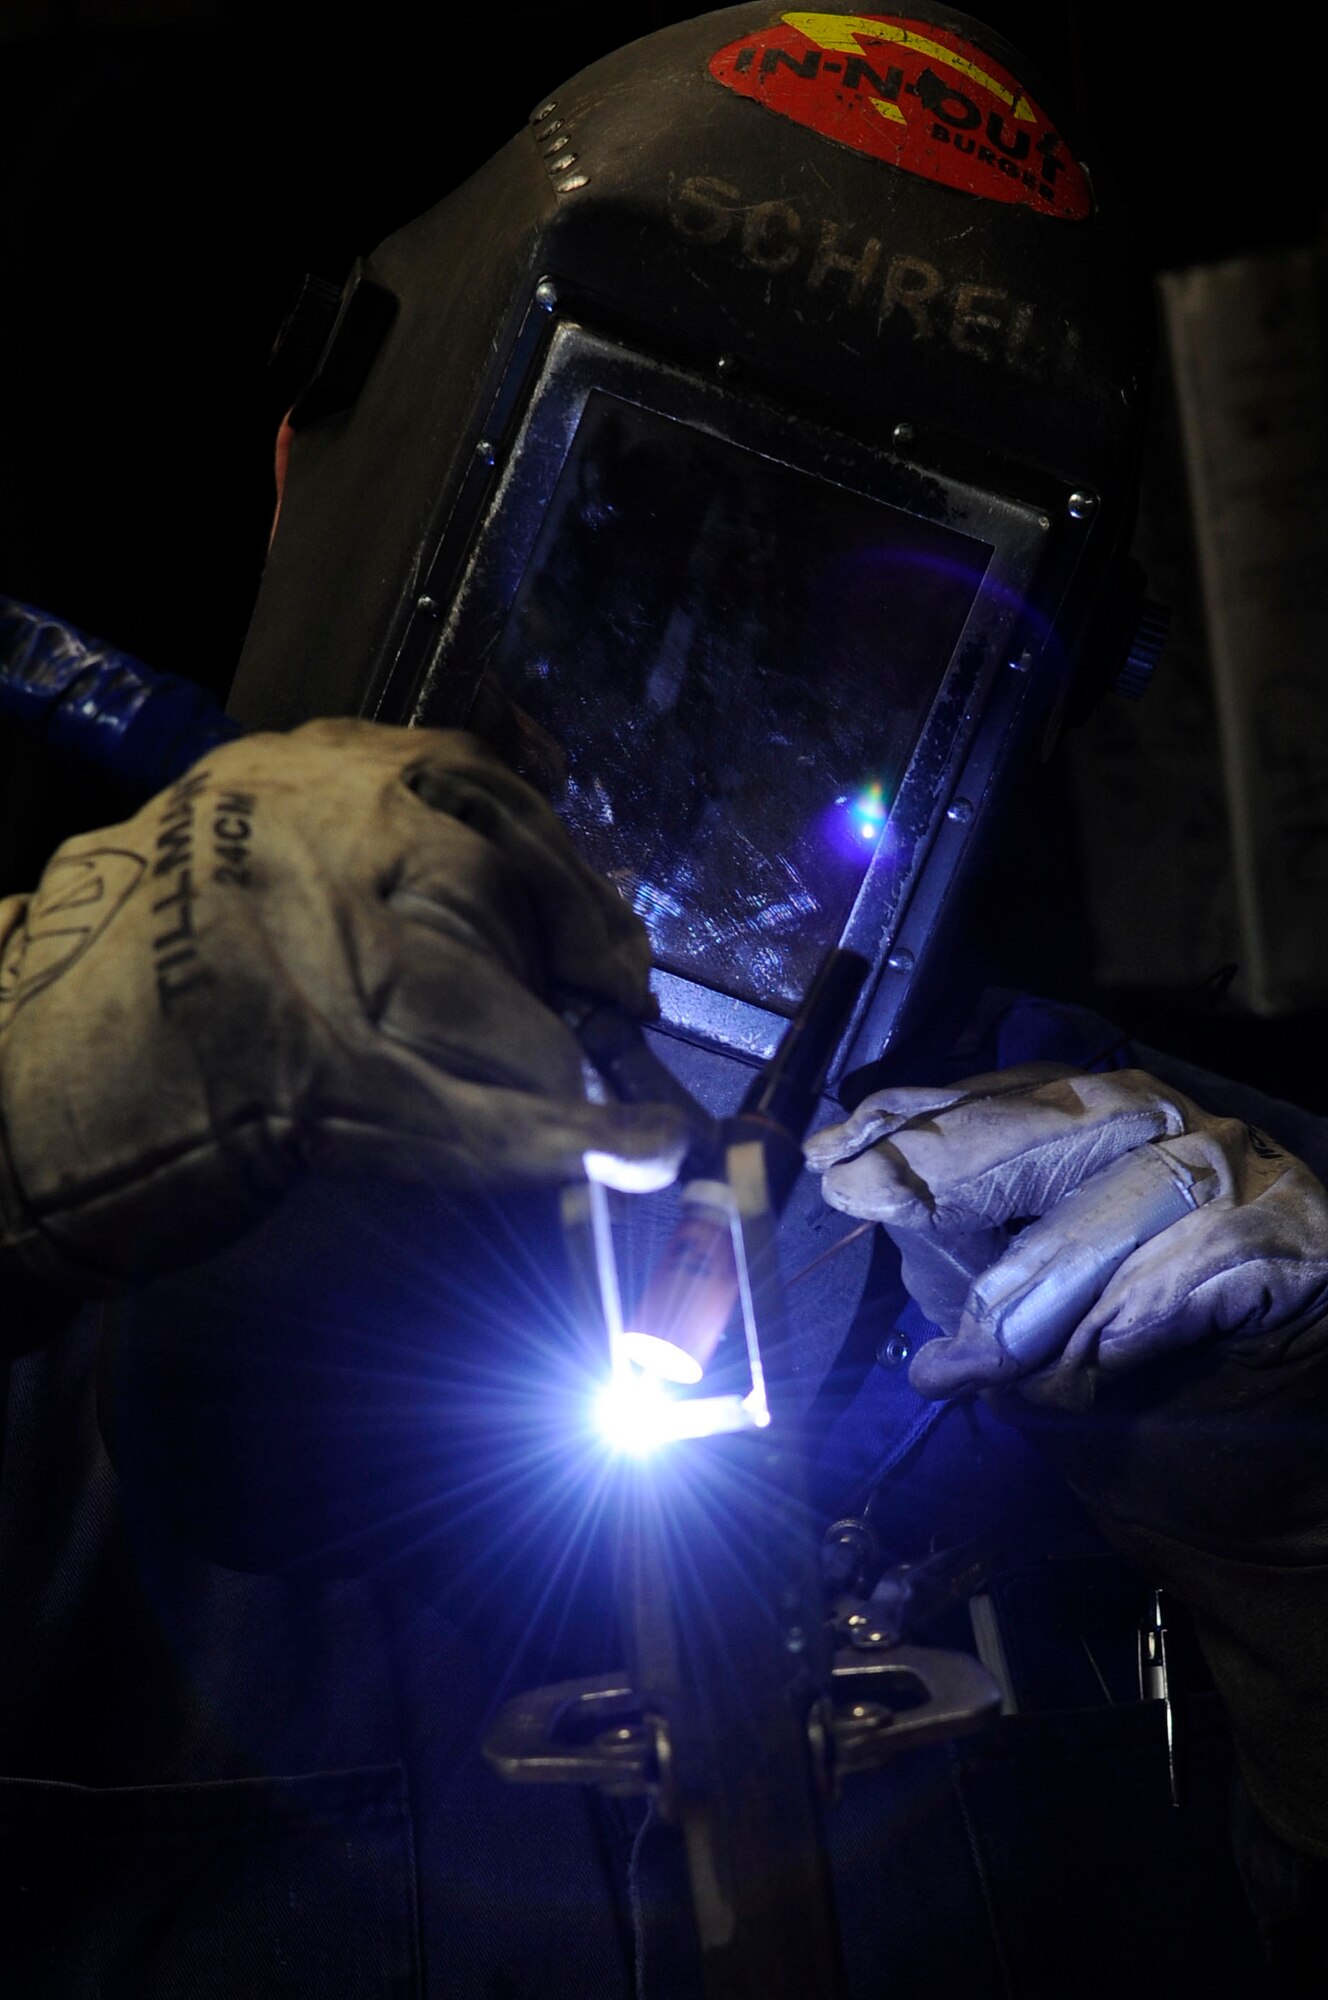 Richard Schrell, 354th Civil Engineer Squadron welder, builds a support bracket Feb. 8, 2012, Eielson Air Force Base, Alaska. The bracket will serve as a camera mount in the central heat and power plant coal bunker. (U.S. Air Force photo/Staff Sgt. Jim Araos)